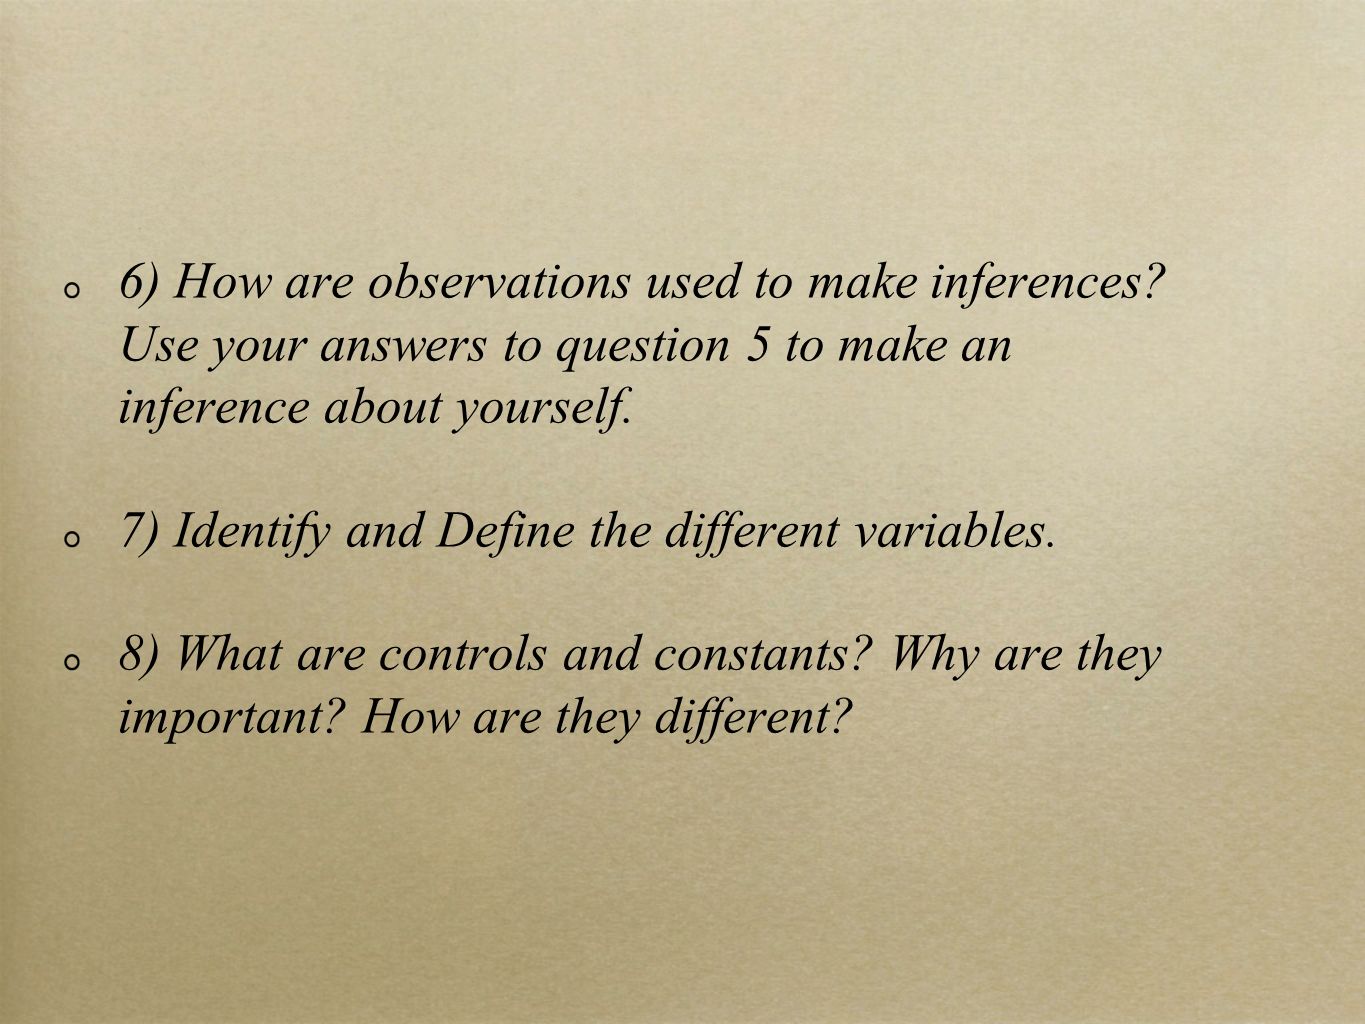 6) How are observations used to make inferences